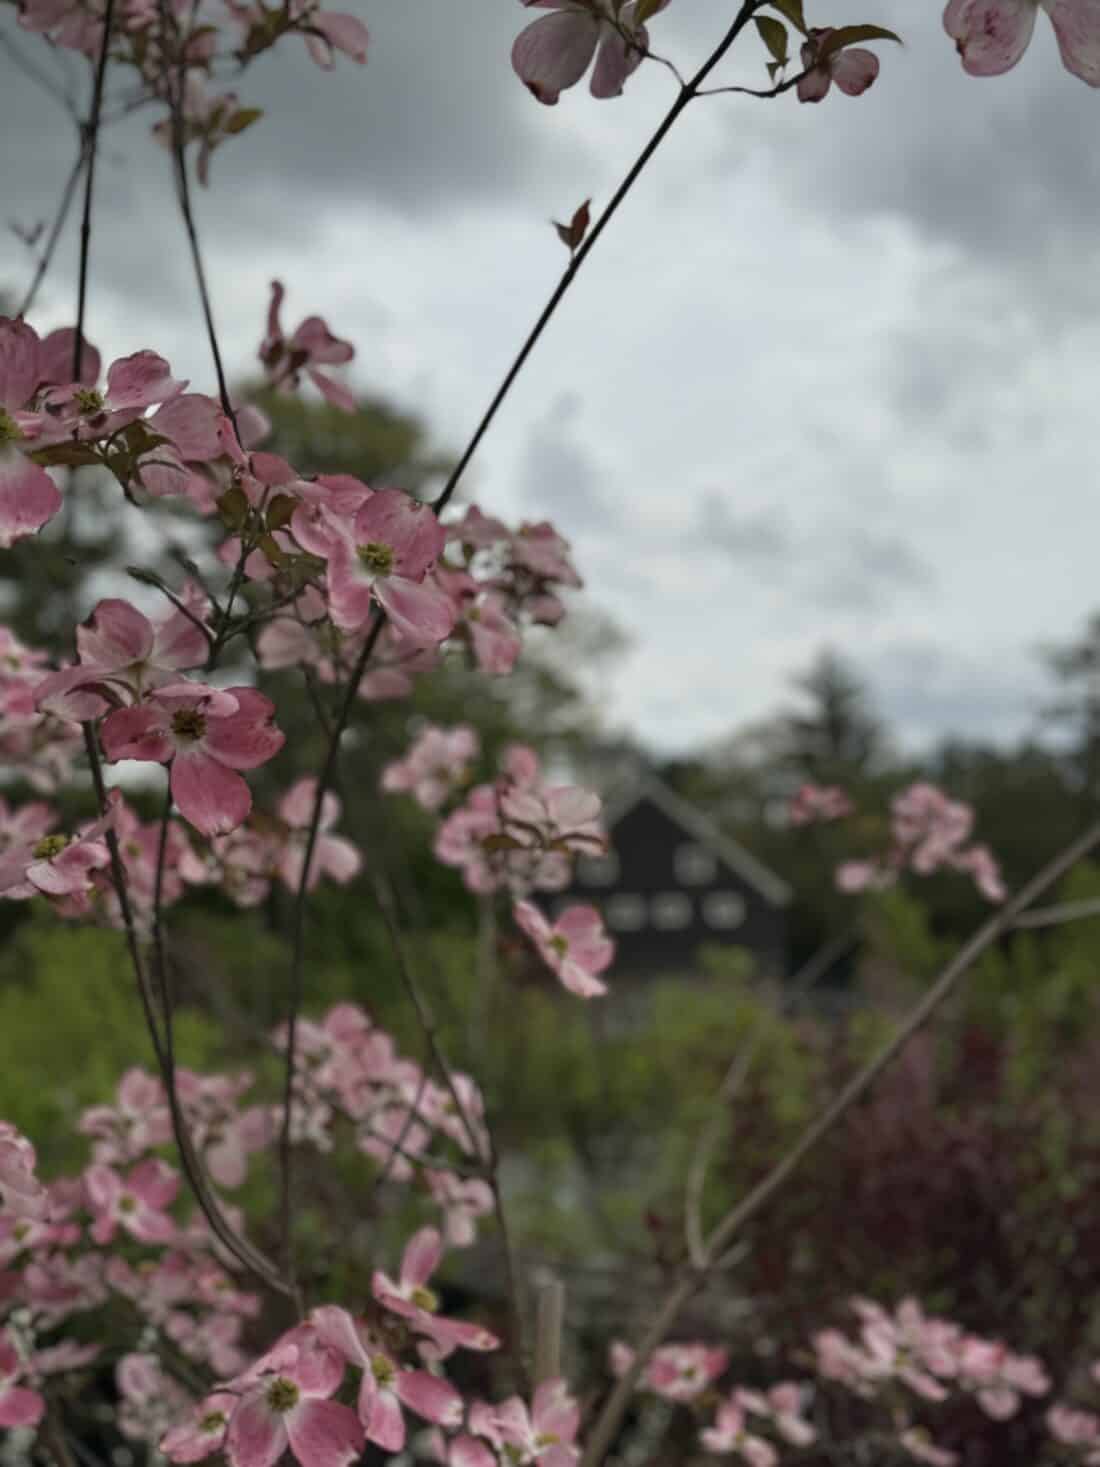 Close-up of pink blossoming branches against a backdrop of an out-of-focus dark-colored house under a cloudy sky. The flowers are prominent in the foreground, adding color to the scene, reminiscent of a charming Boston Garden Center, while the house and sky provide a muted background.